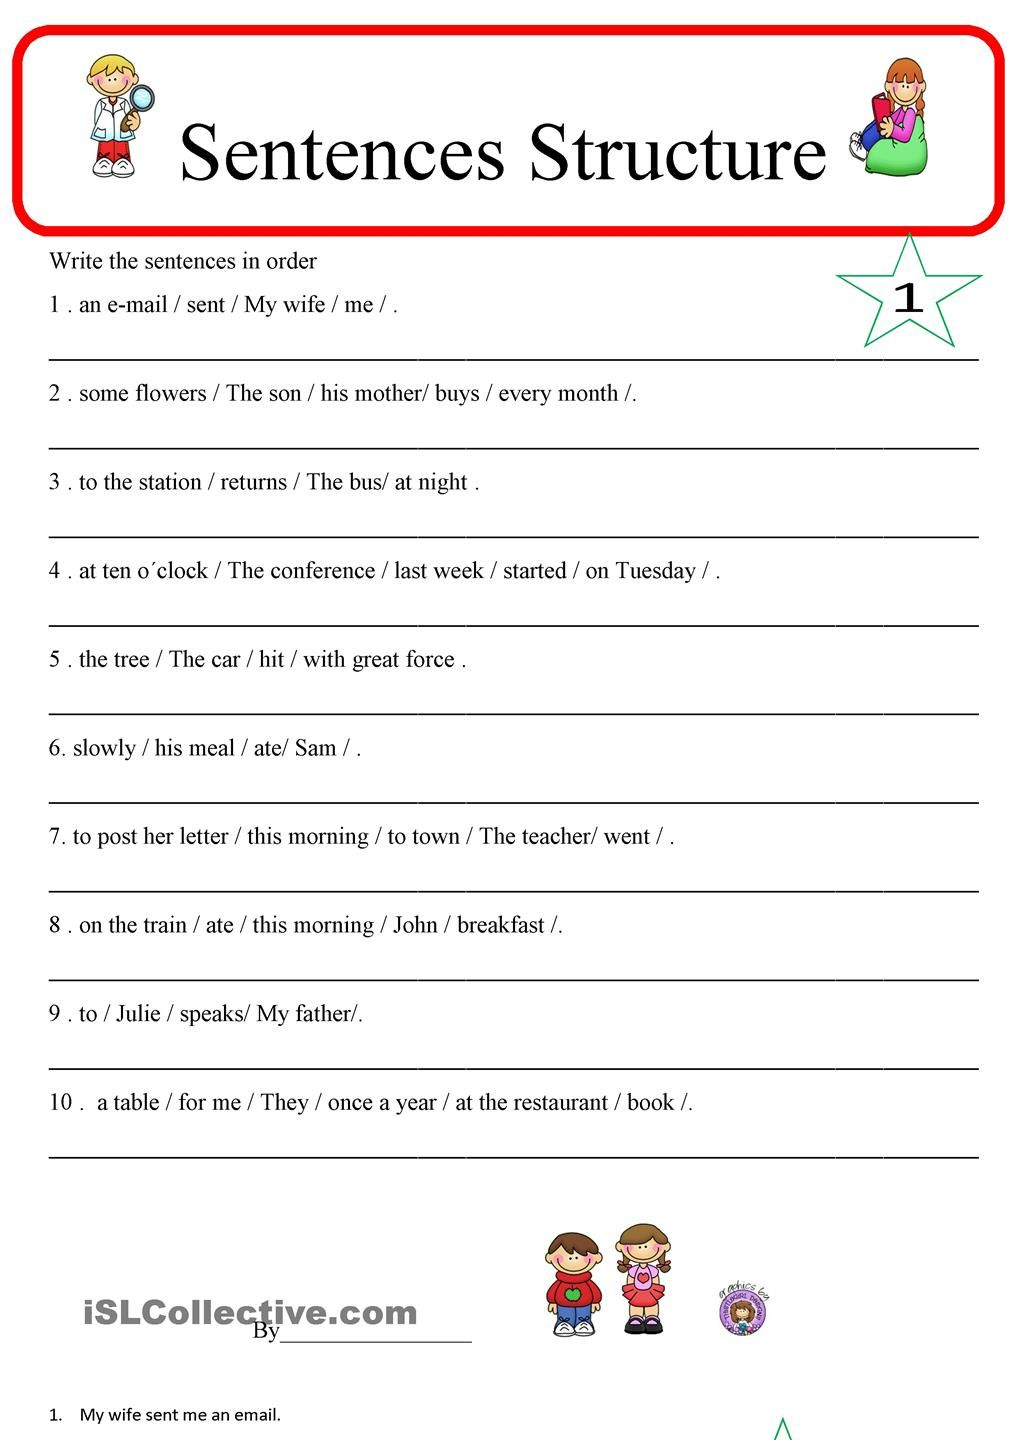 How To Write A Complete Sentence Worksheets